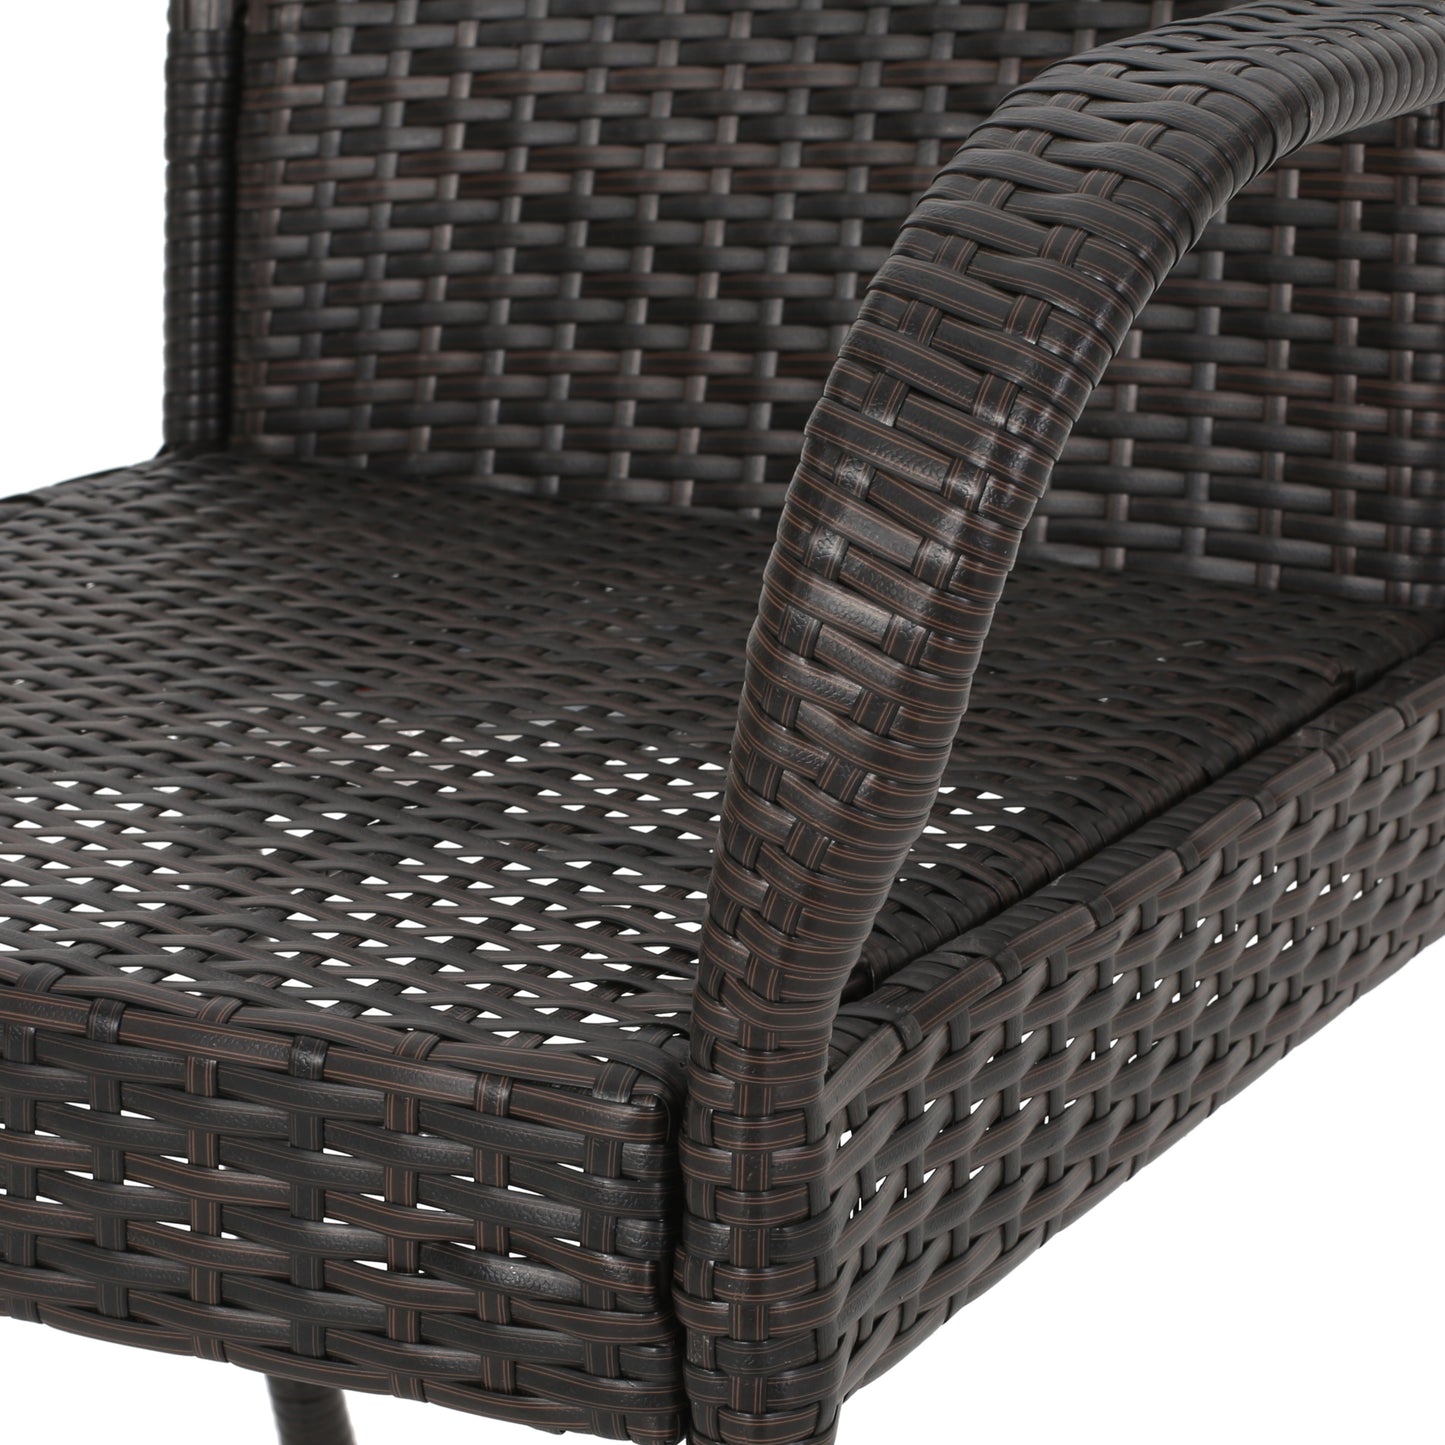 Bannon Outdoor Contemporary 4 Seater Wicker Dining Set